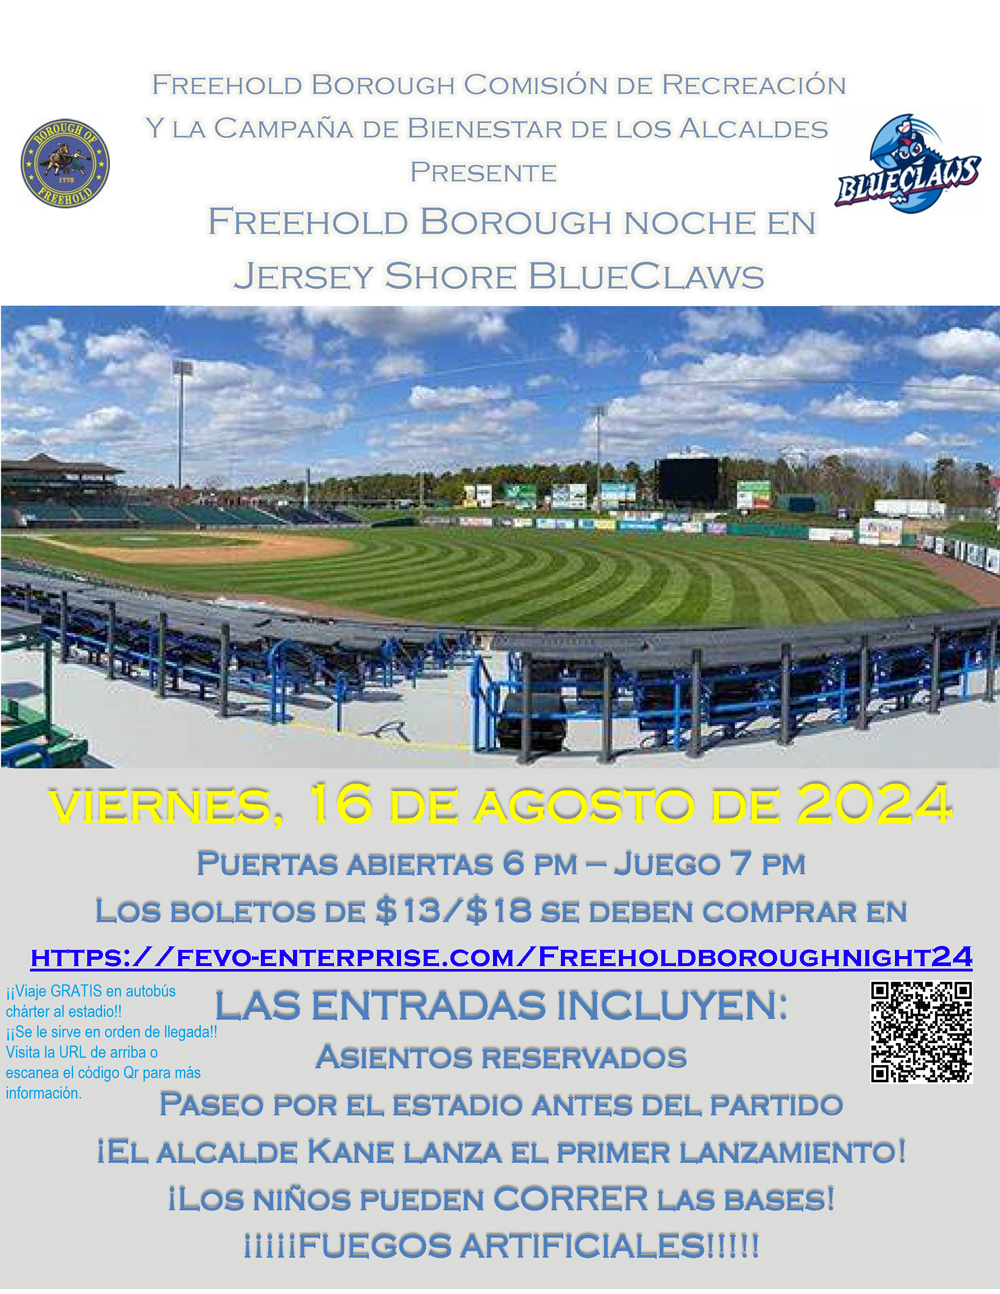 Blue Claws flyer Spanish language. Click to open an OCR scanned PDF version of the flyer. Game is Friday August 16, 2024. Gates open at 6PM, Game starts at 7PM. Tickets are $13, and additional $5 package can be bought.